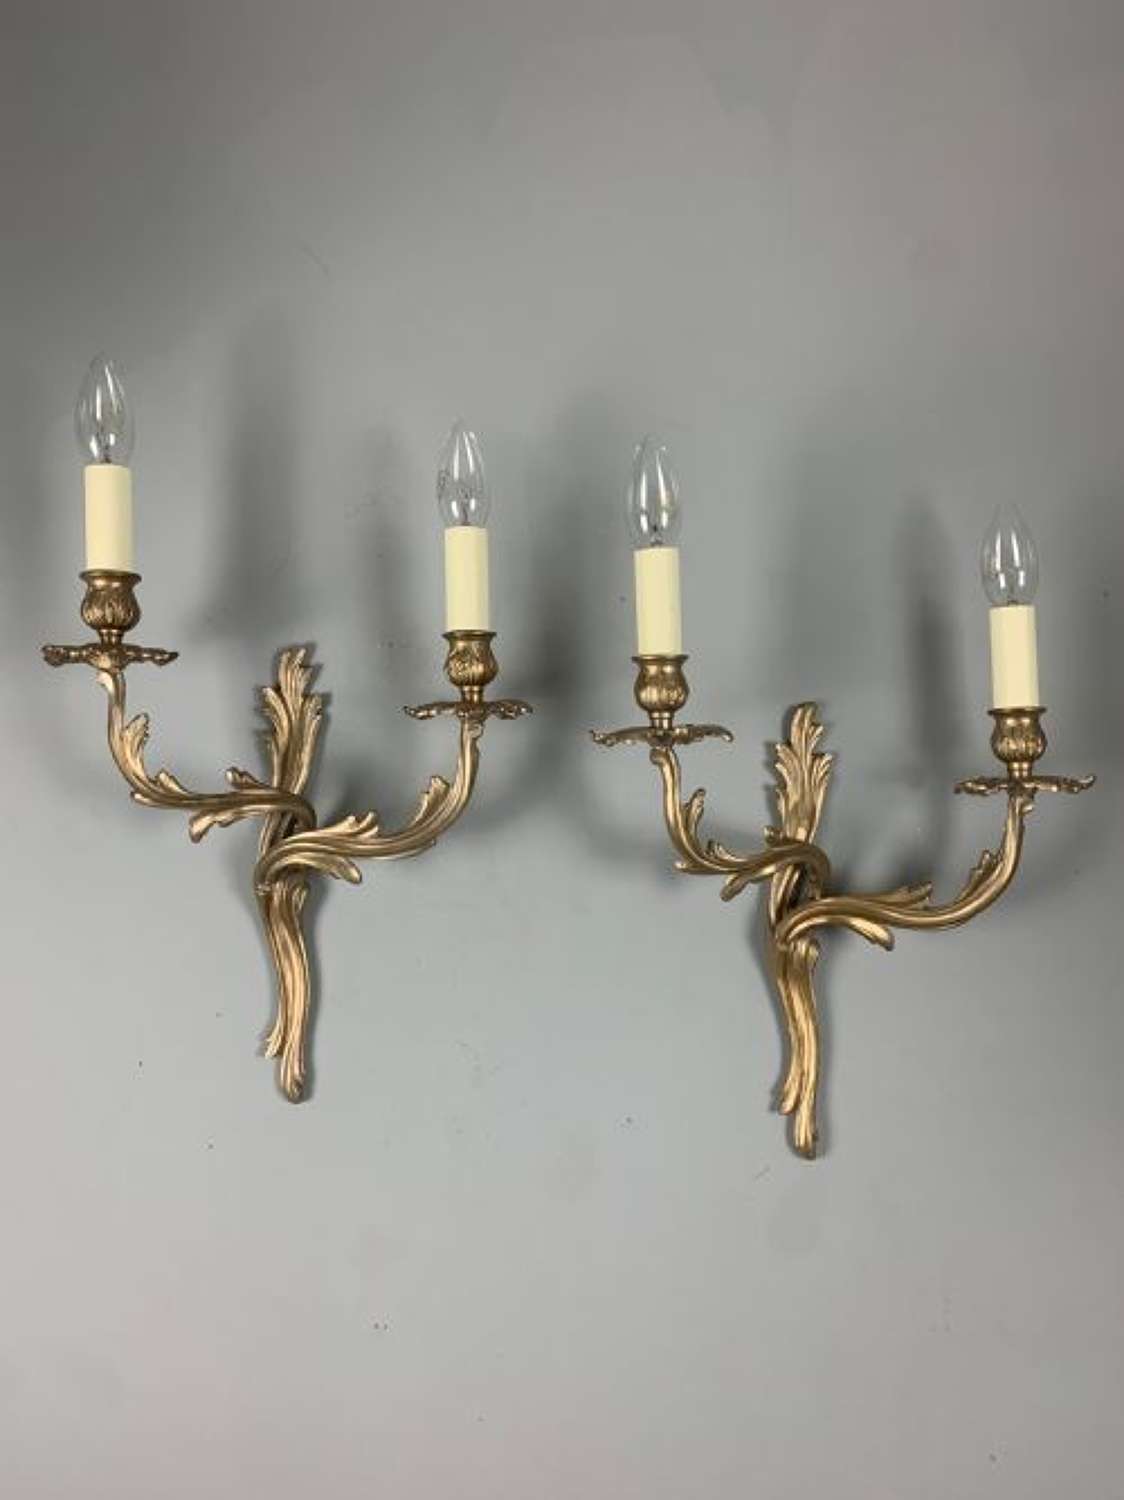 Pair of French Antique Wall Lights, Silver Bronze Gilt Finish